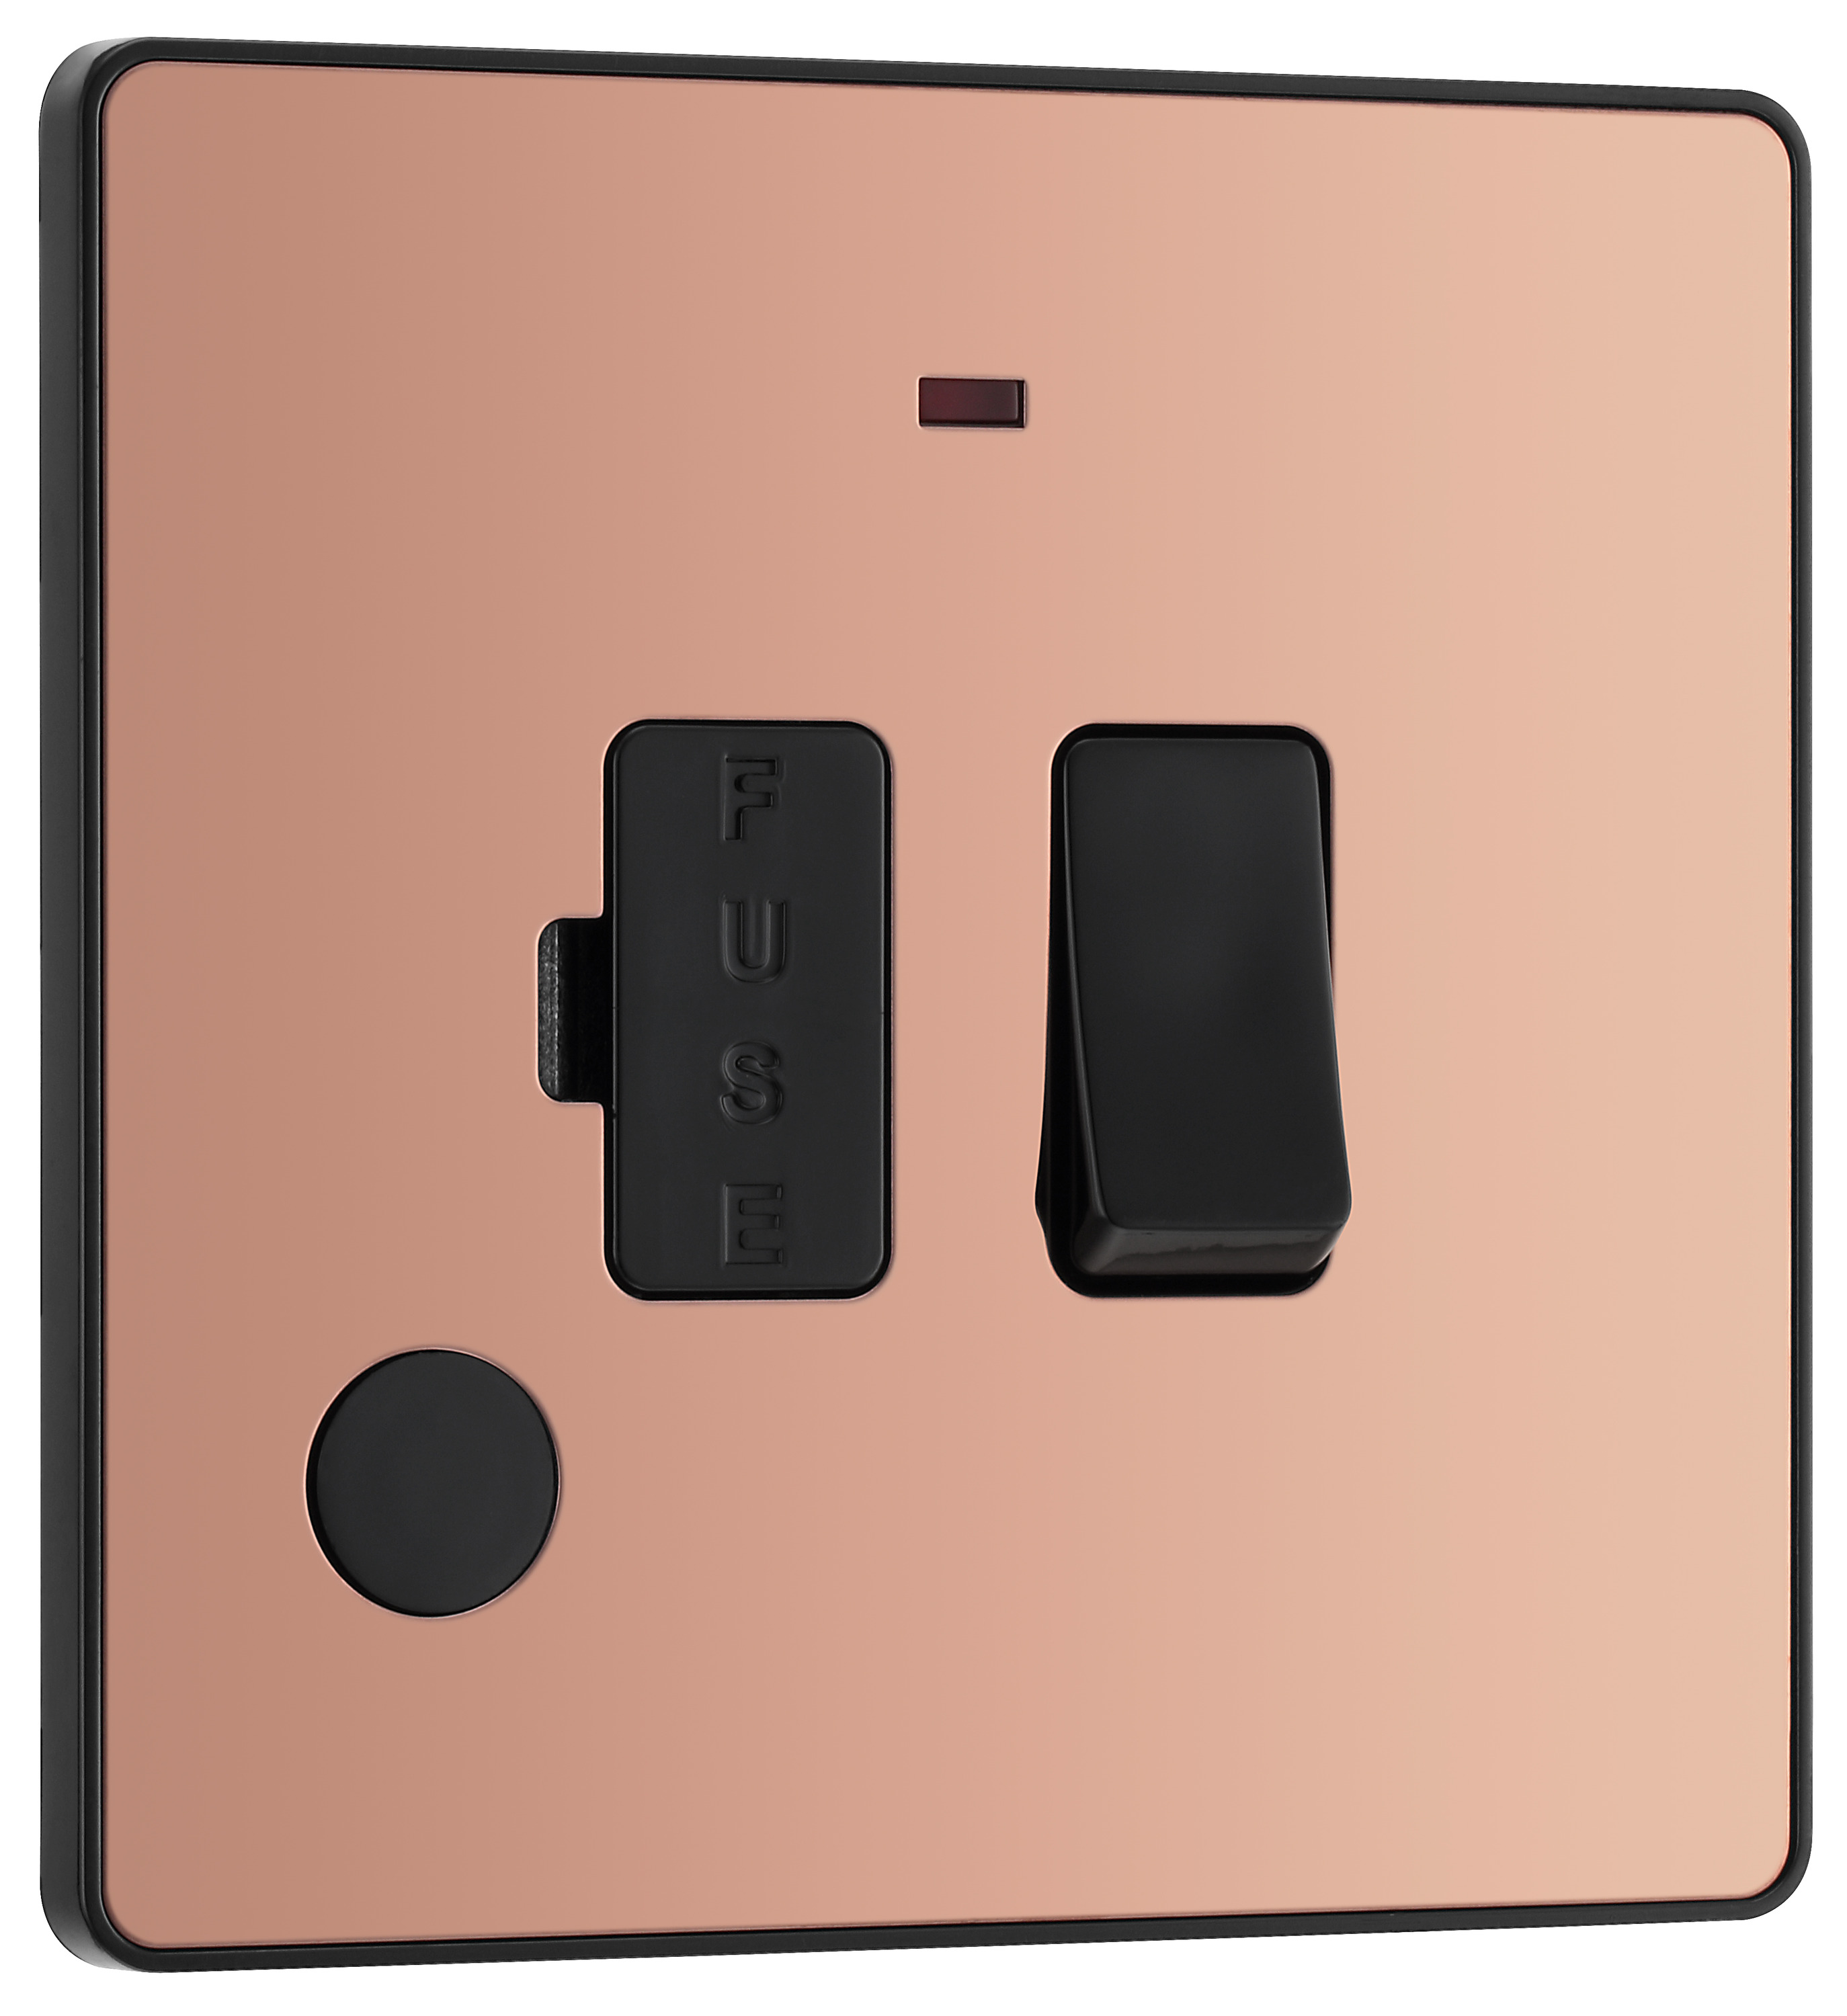 Image of BG Evolve Polished Copper 13A Switched Fused Connection Unit with Power Led Indicator & Flex Outlet